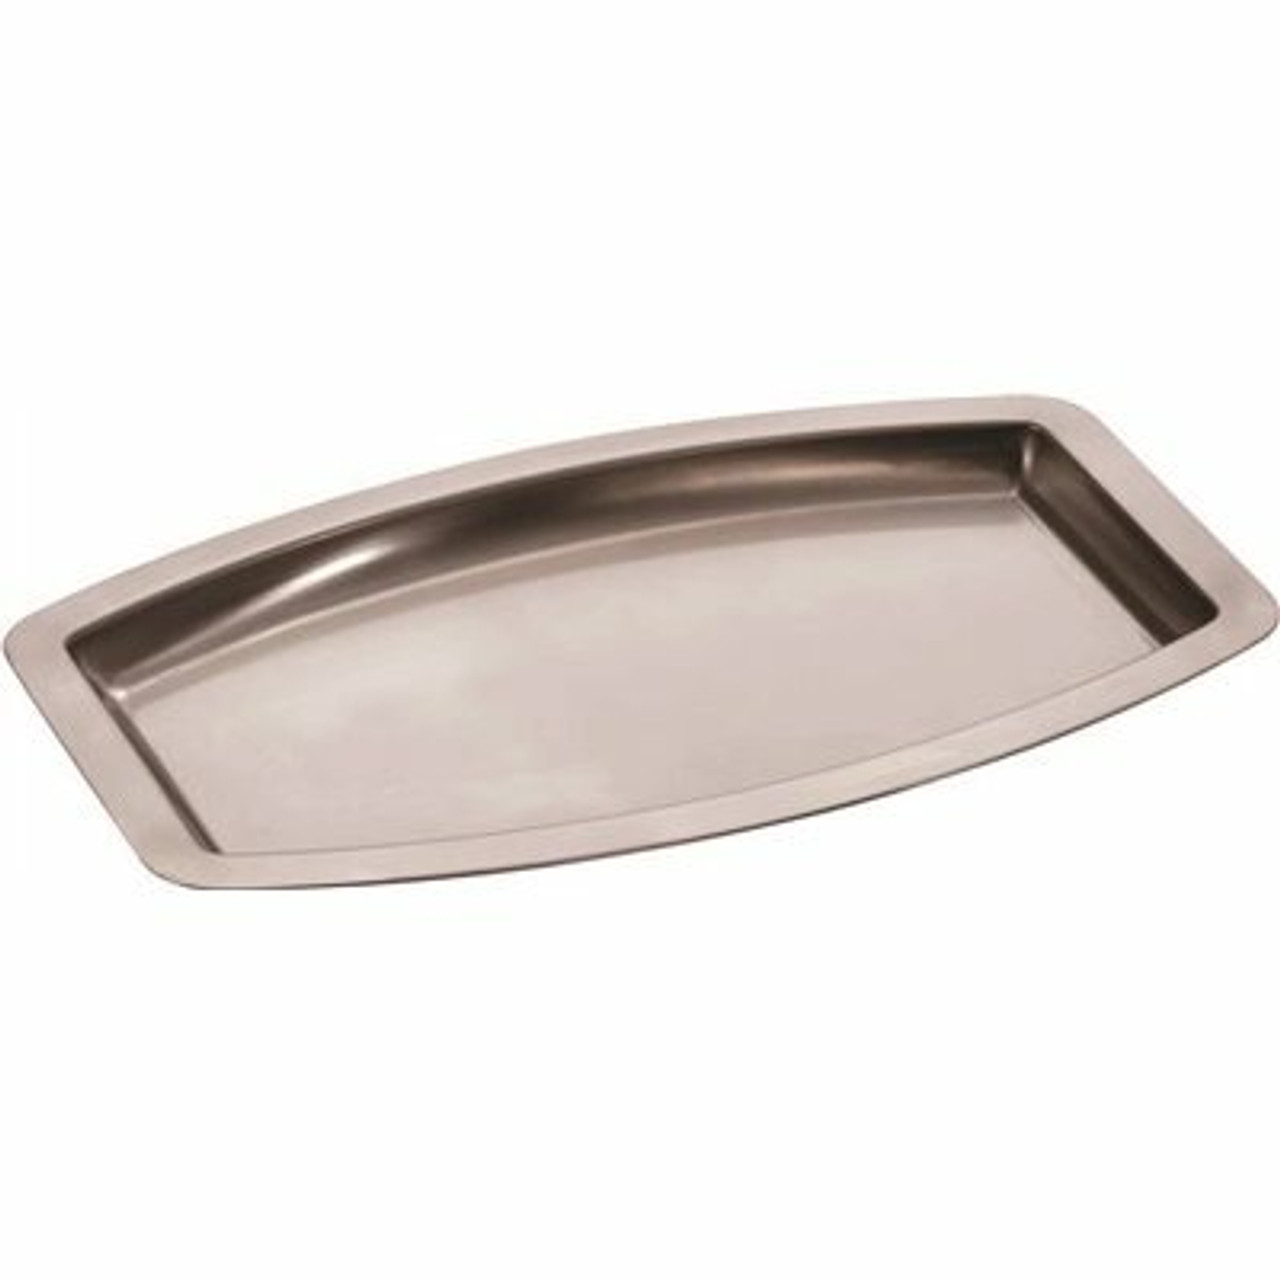 Premier Amenity Tray In Stainless Steel